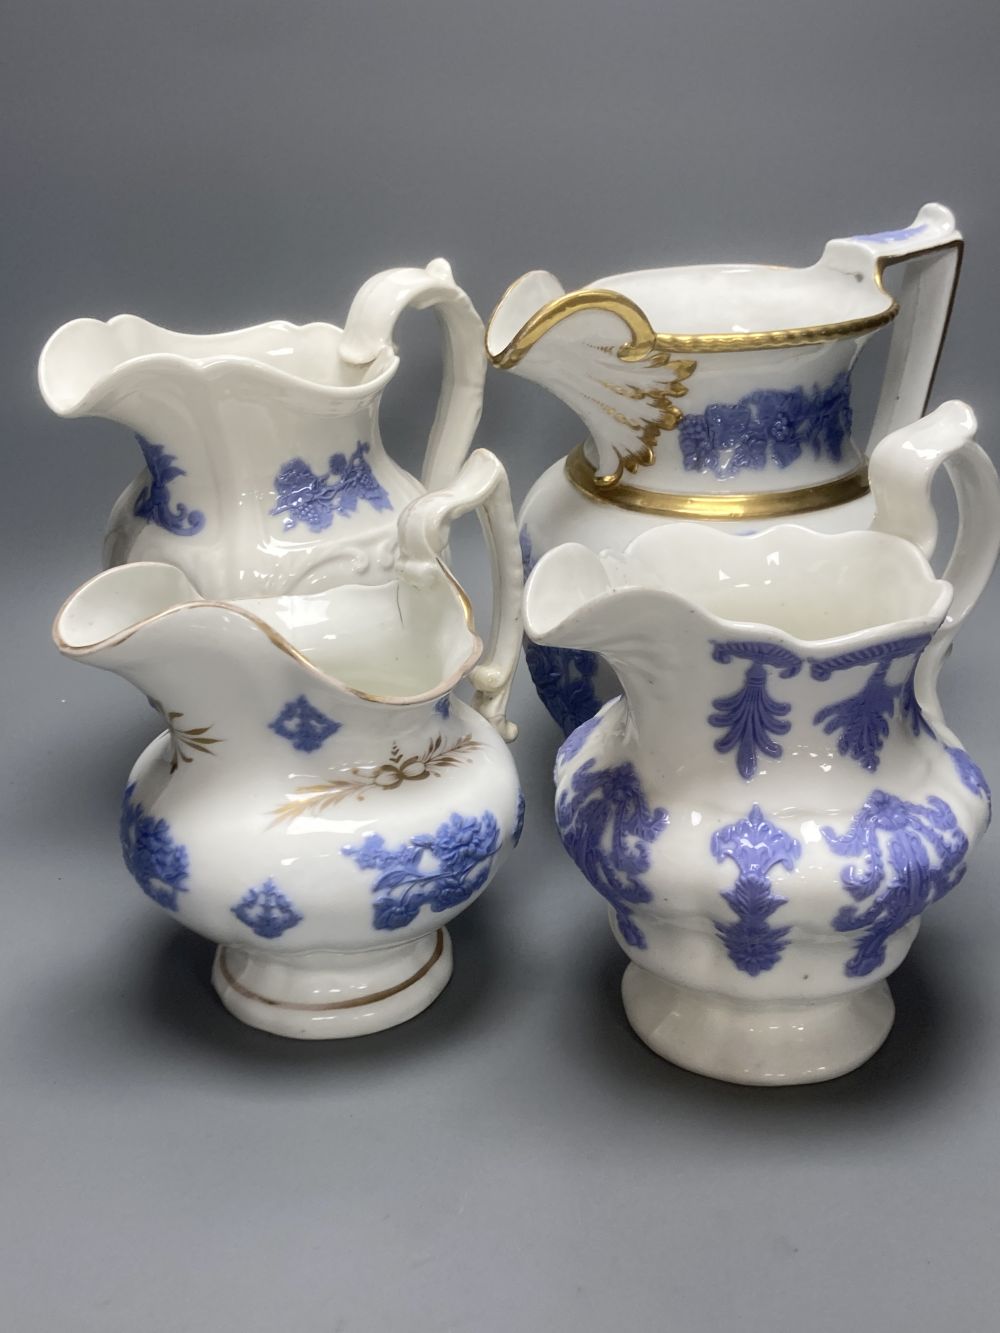 Four early 19th century Staffordshire jugs, each with lilac coloured floral applied panels, one dated 1826, tallest 22cm